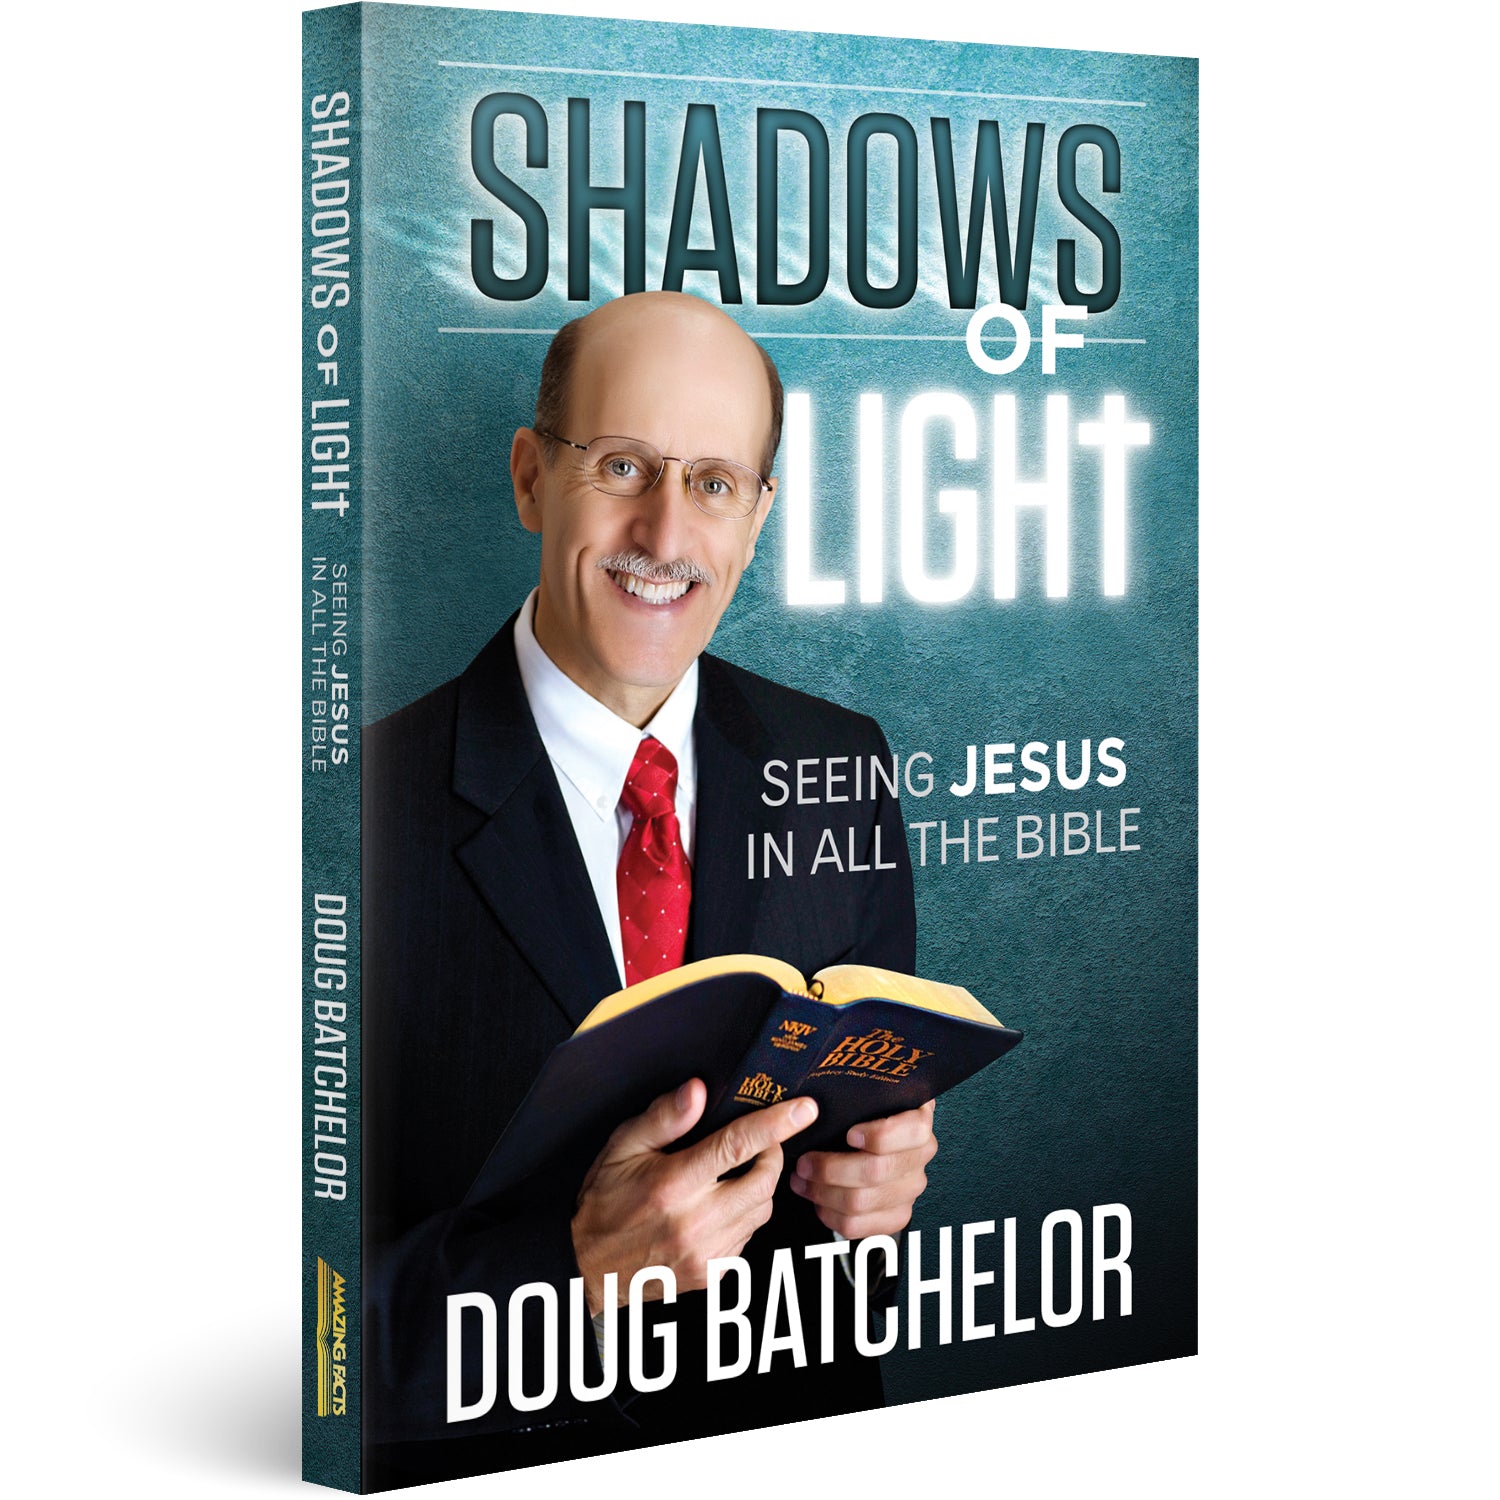 Shadows of Seeing Jesus in All Bible by Doug Batchelor